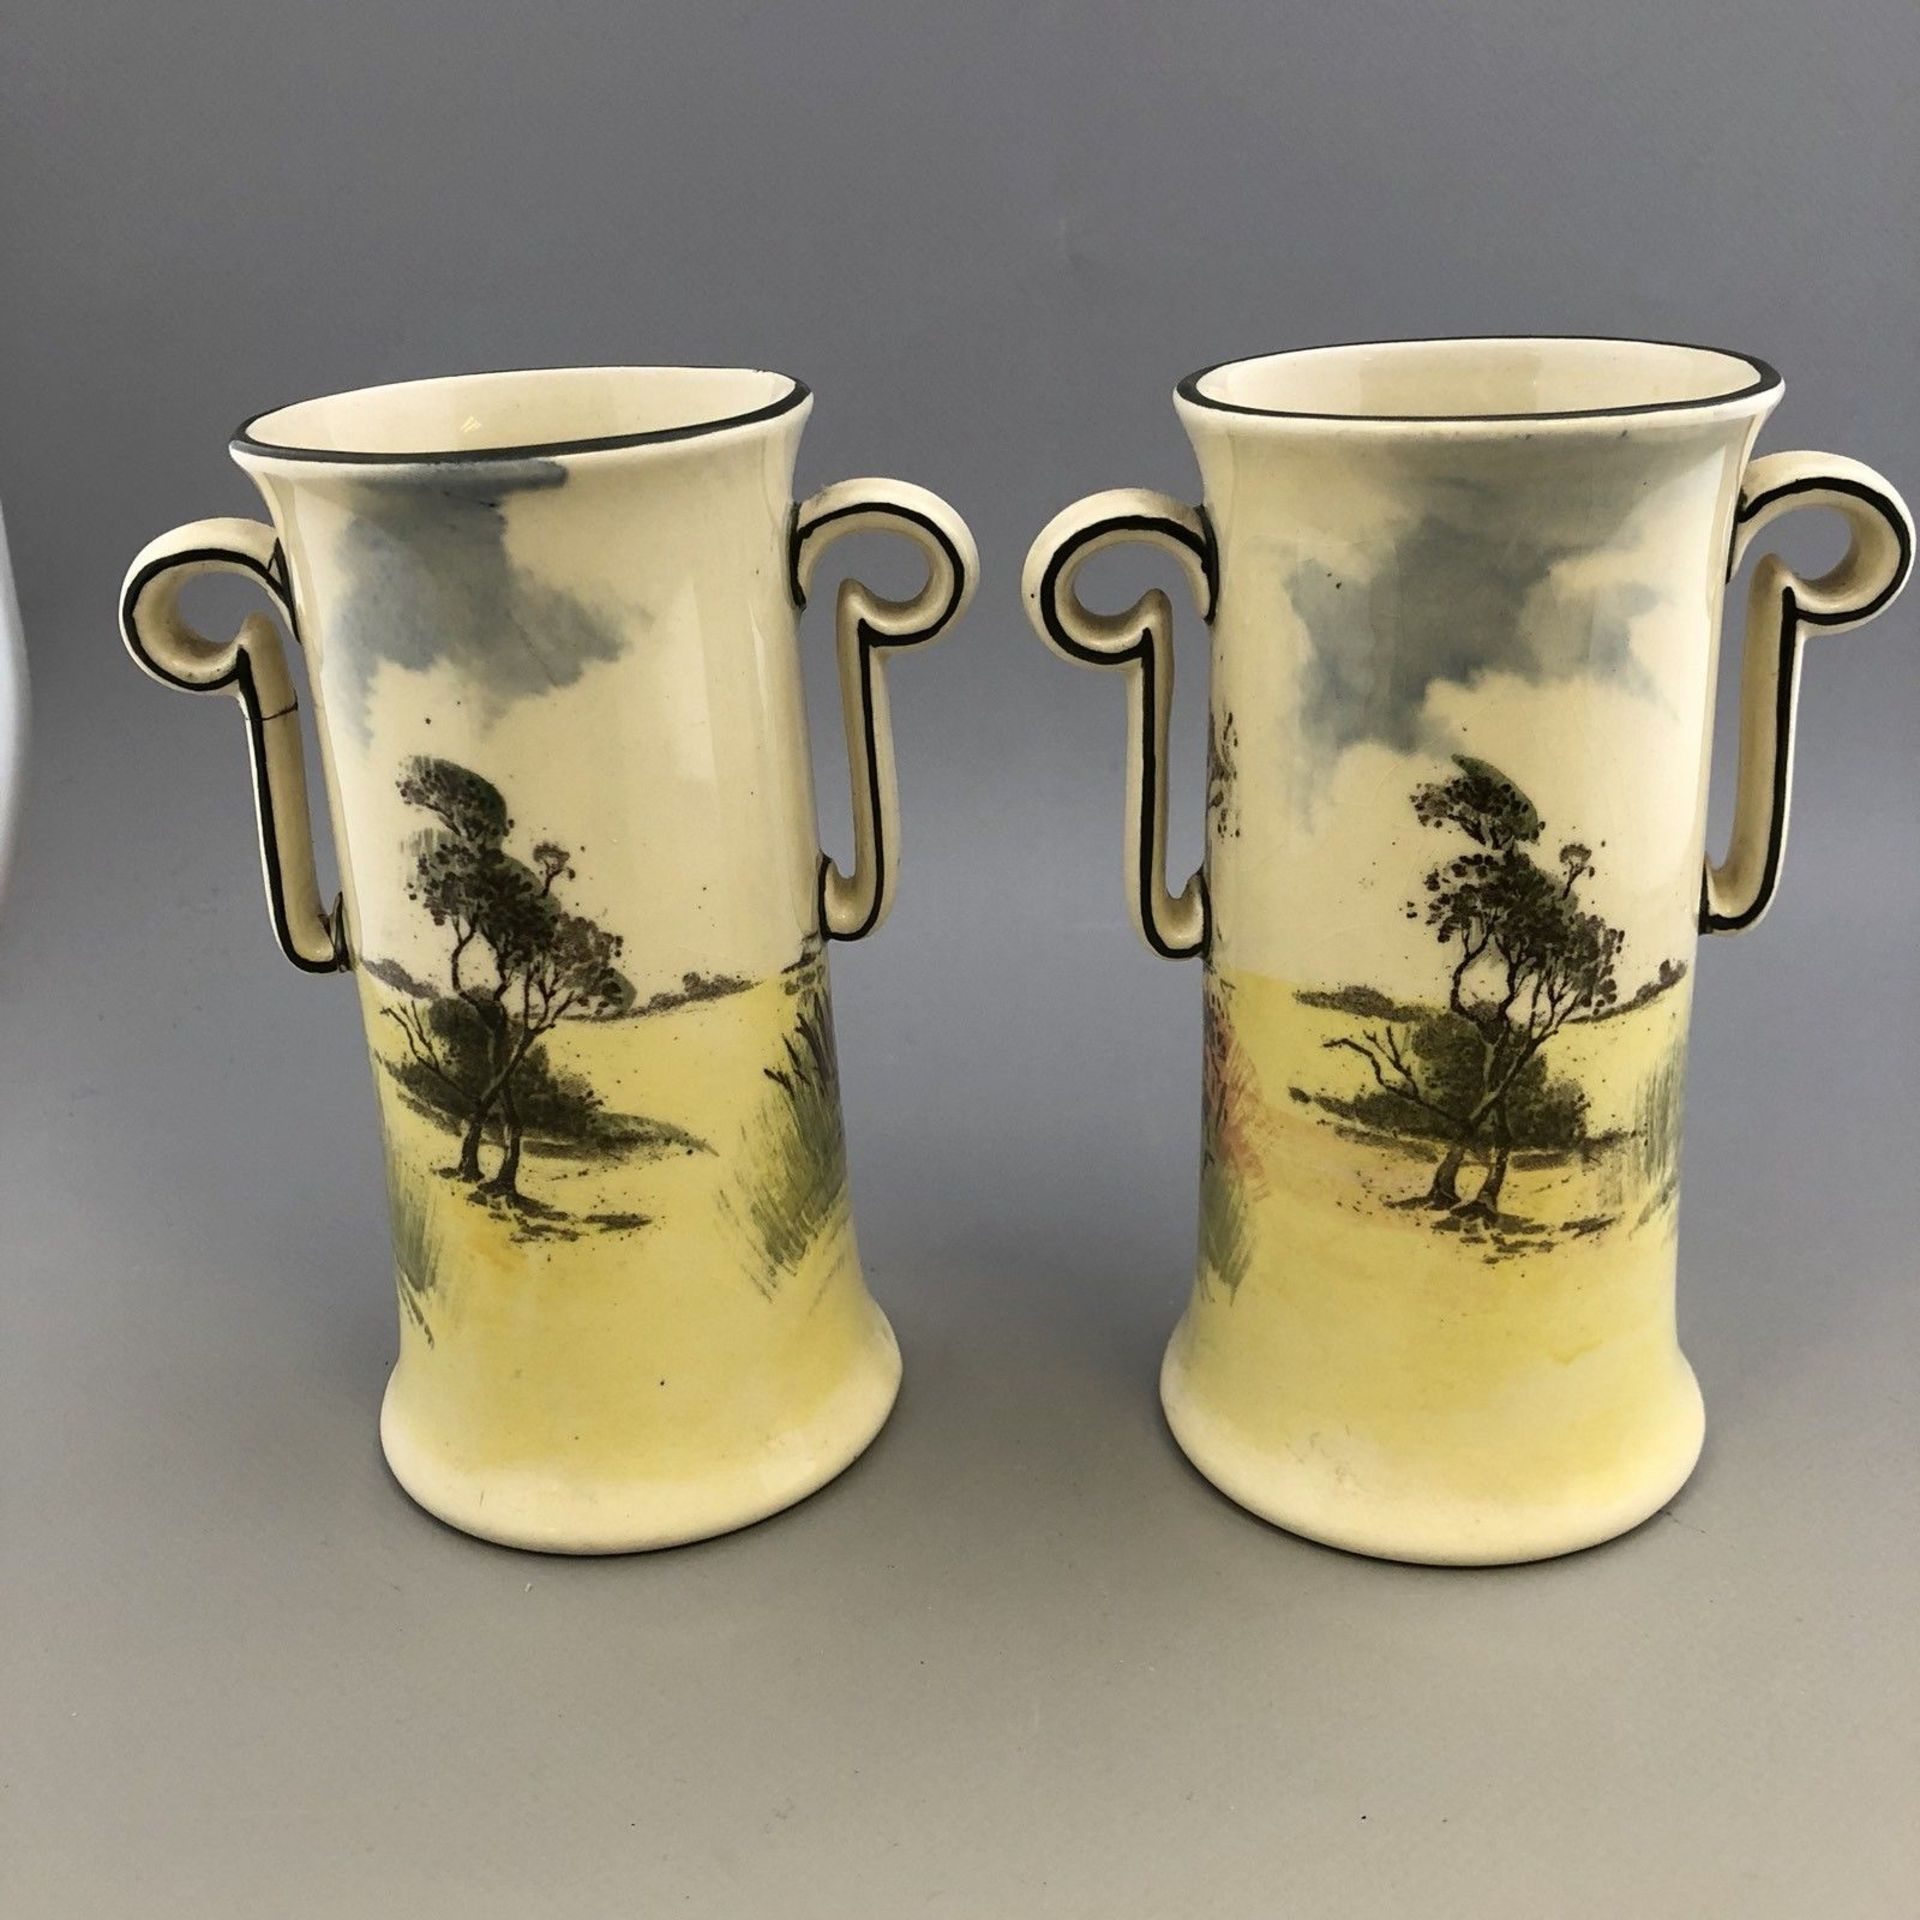 Vintage Pair of Royal Doulton Two Handled Vases with Rustic Scenic Designs 1930s - Image 4 of 10